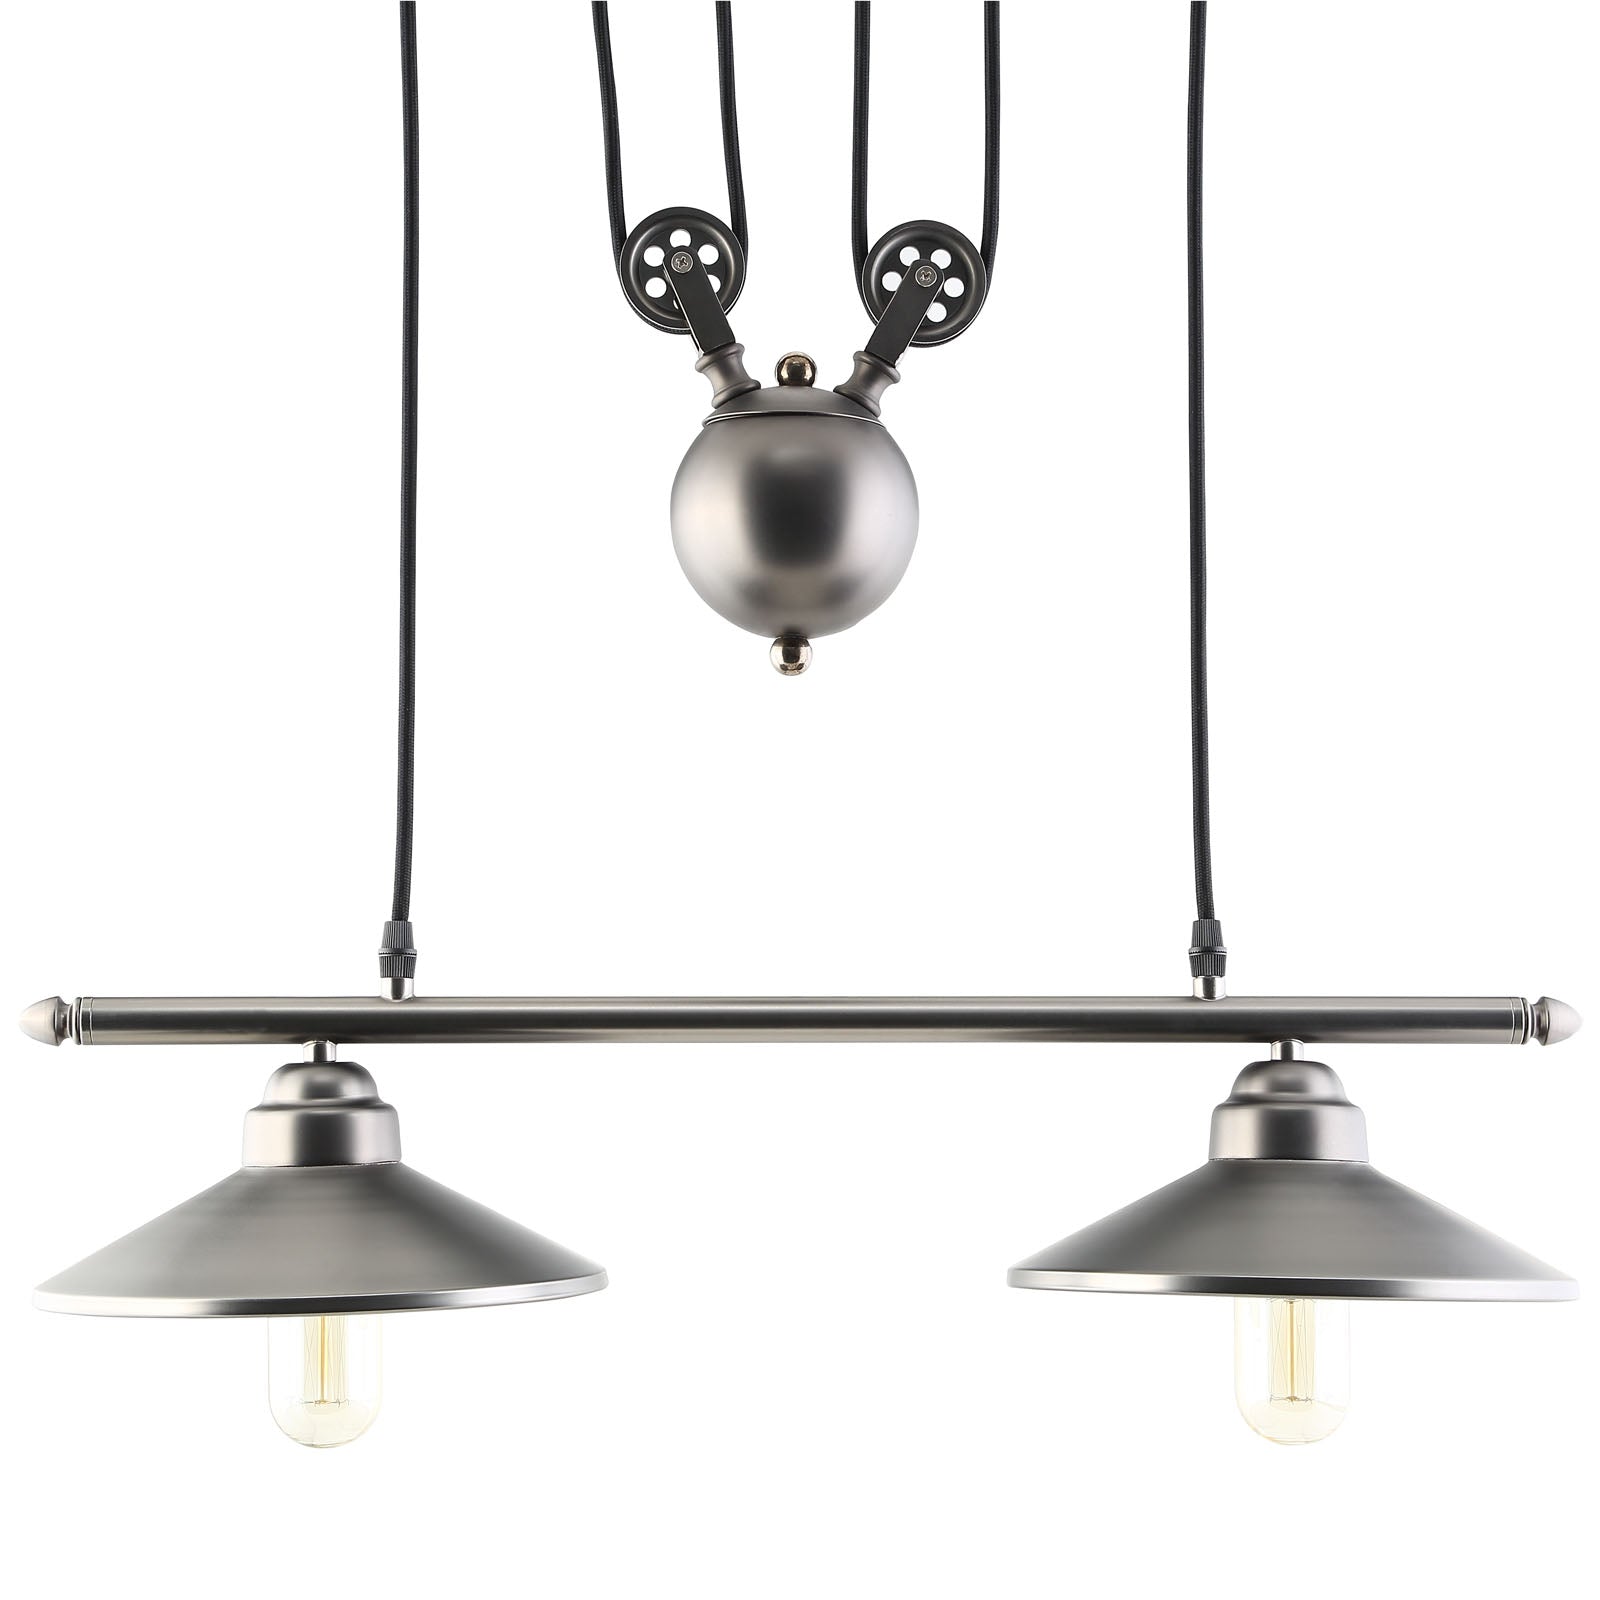 Innovateous Ceiling Fixture - East Shore Modern Home Furnishings